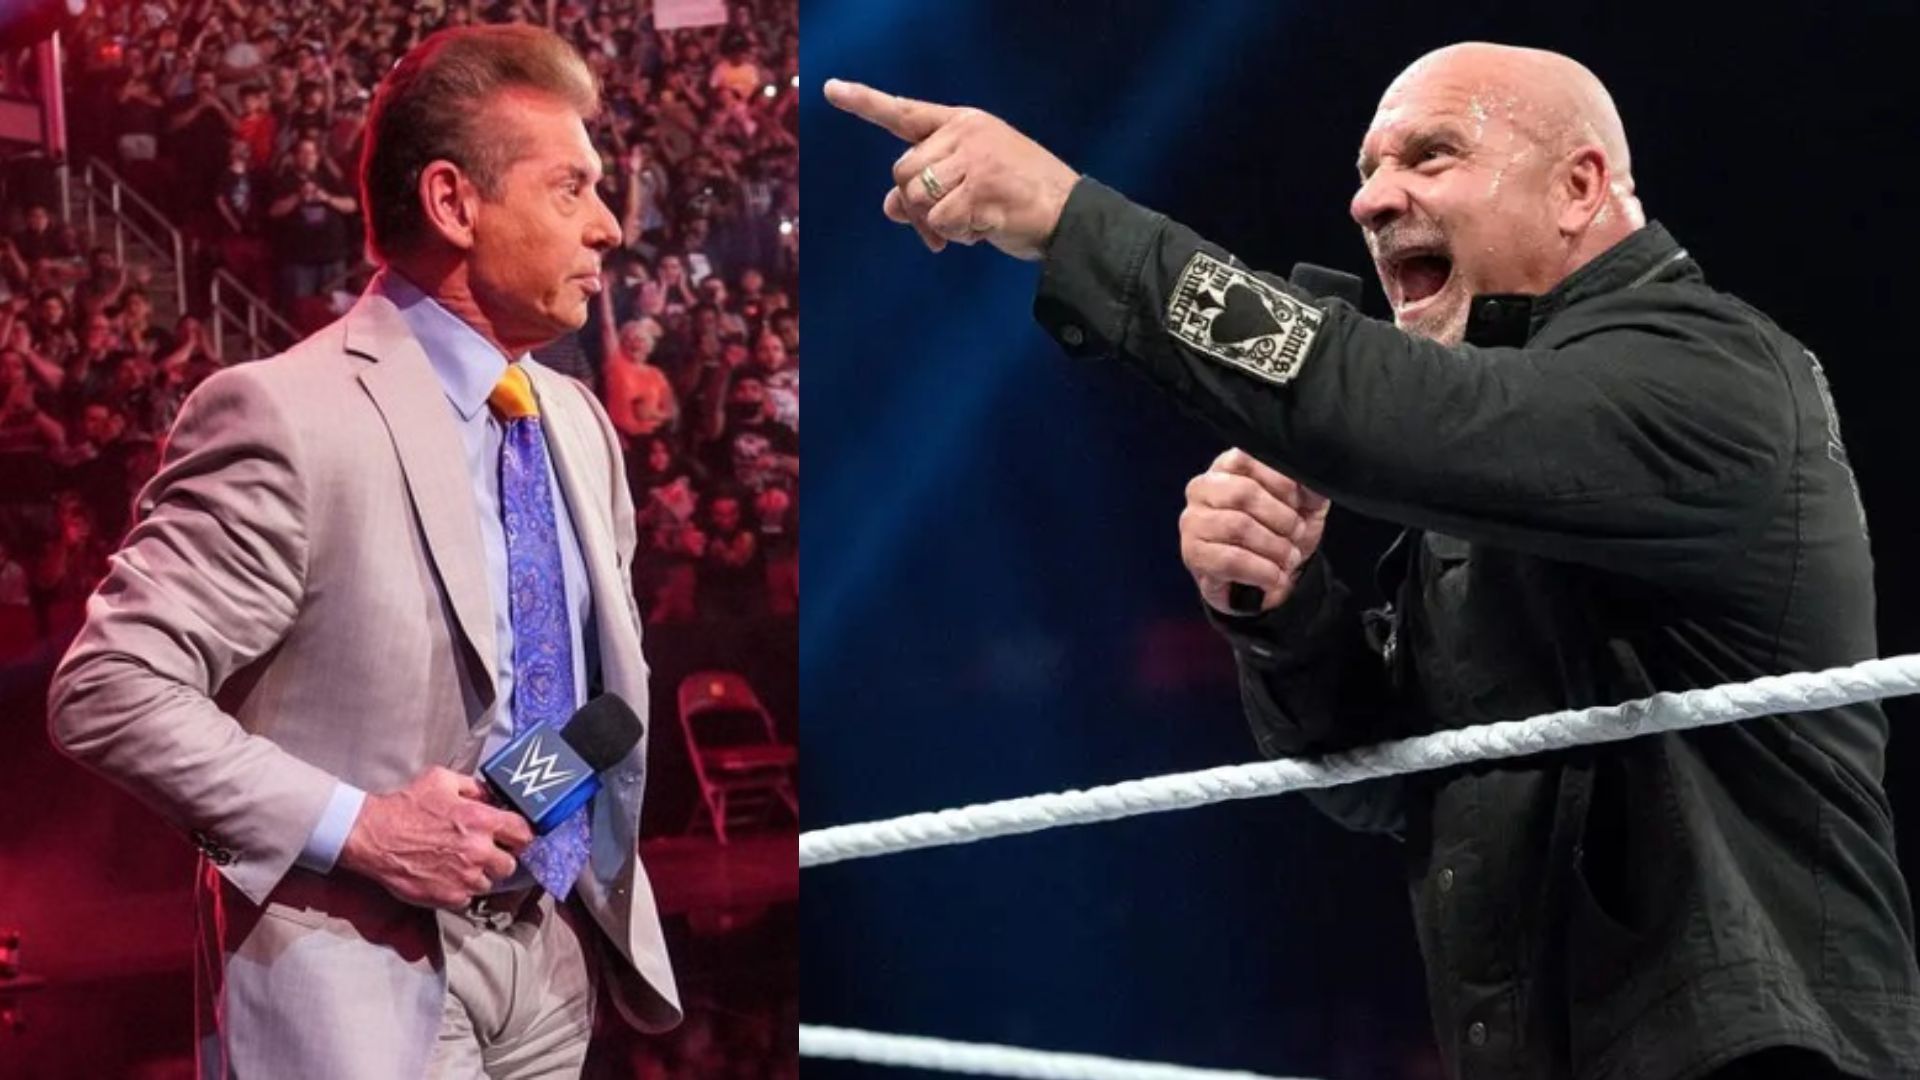 Vince McMahon hired Goldberg as one of WWE